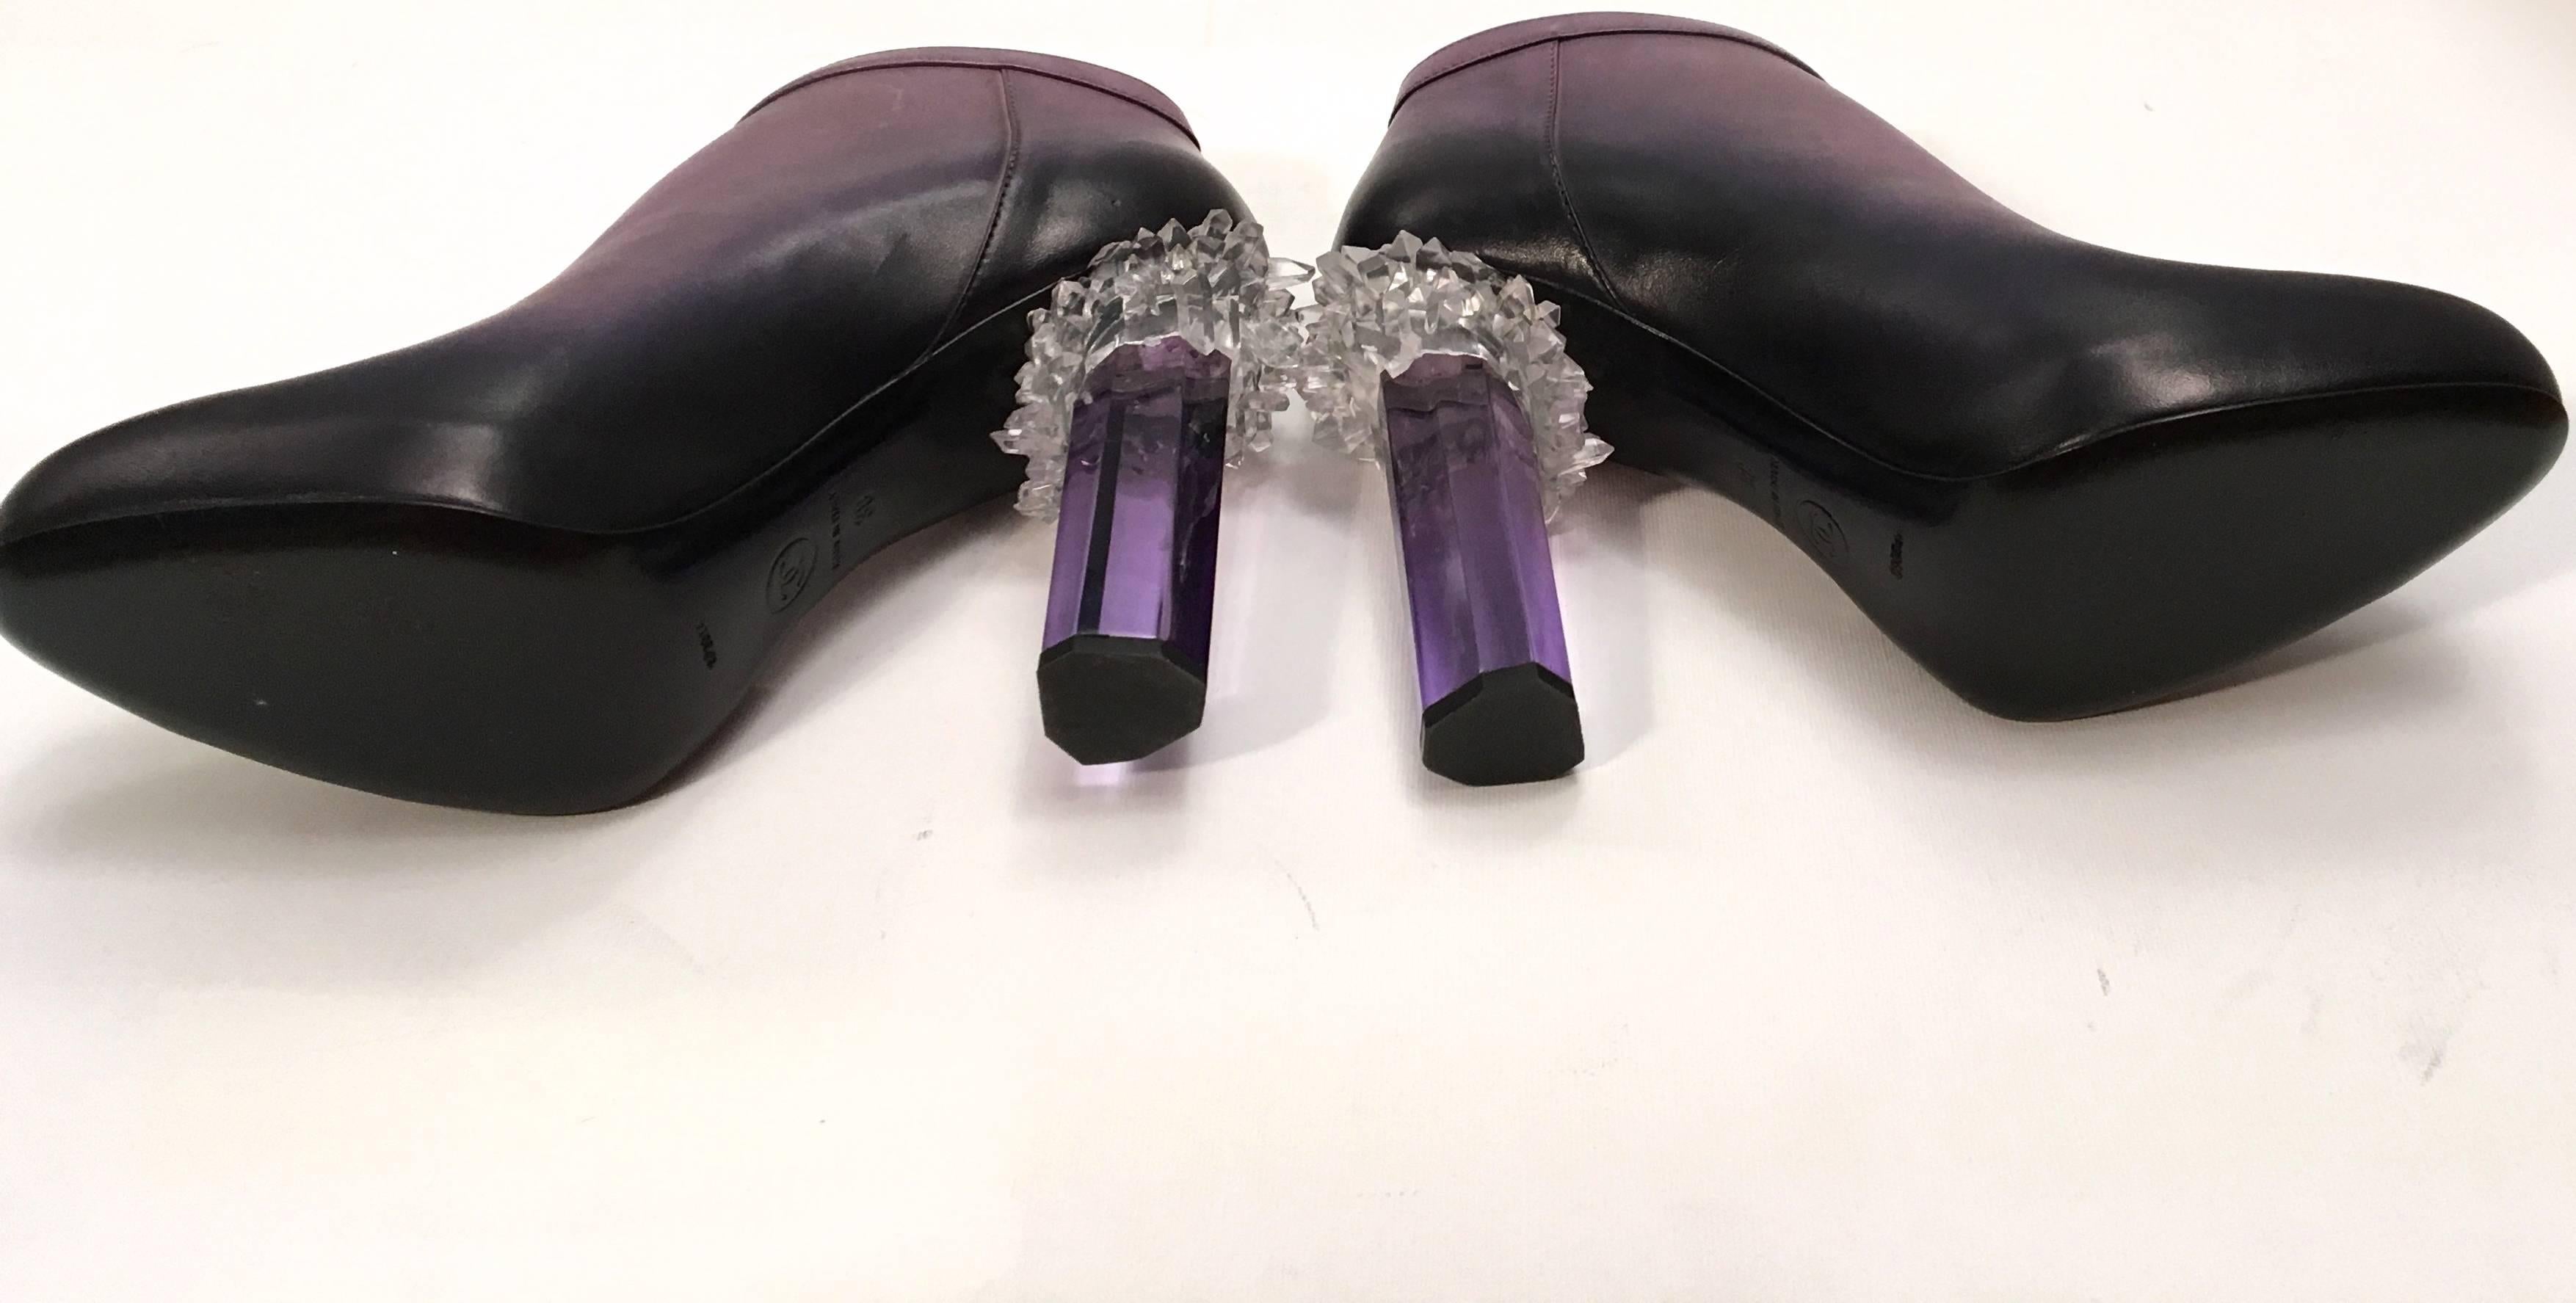 Rare Chanel Runway Boots - Purple and Black - Lucite Heels - Size 38 4